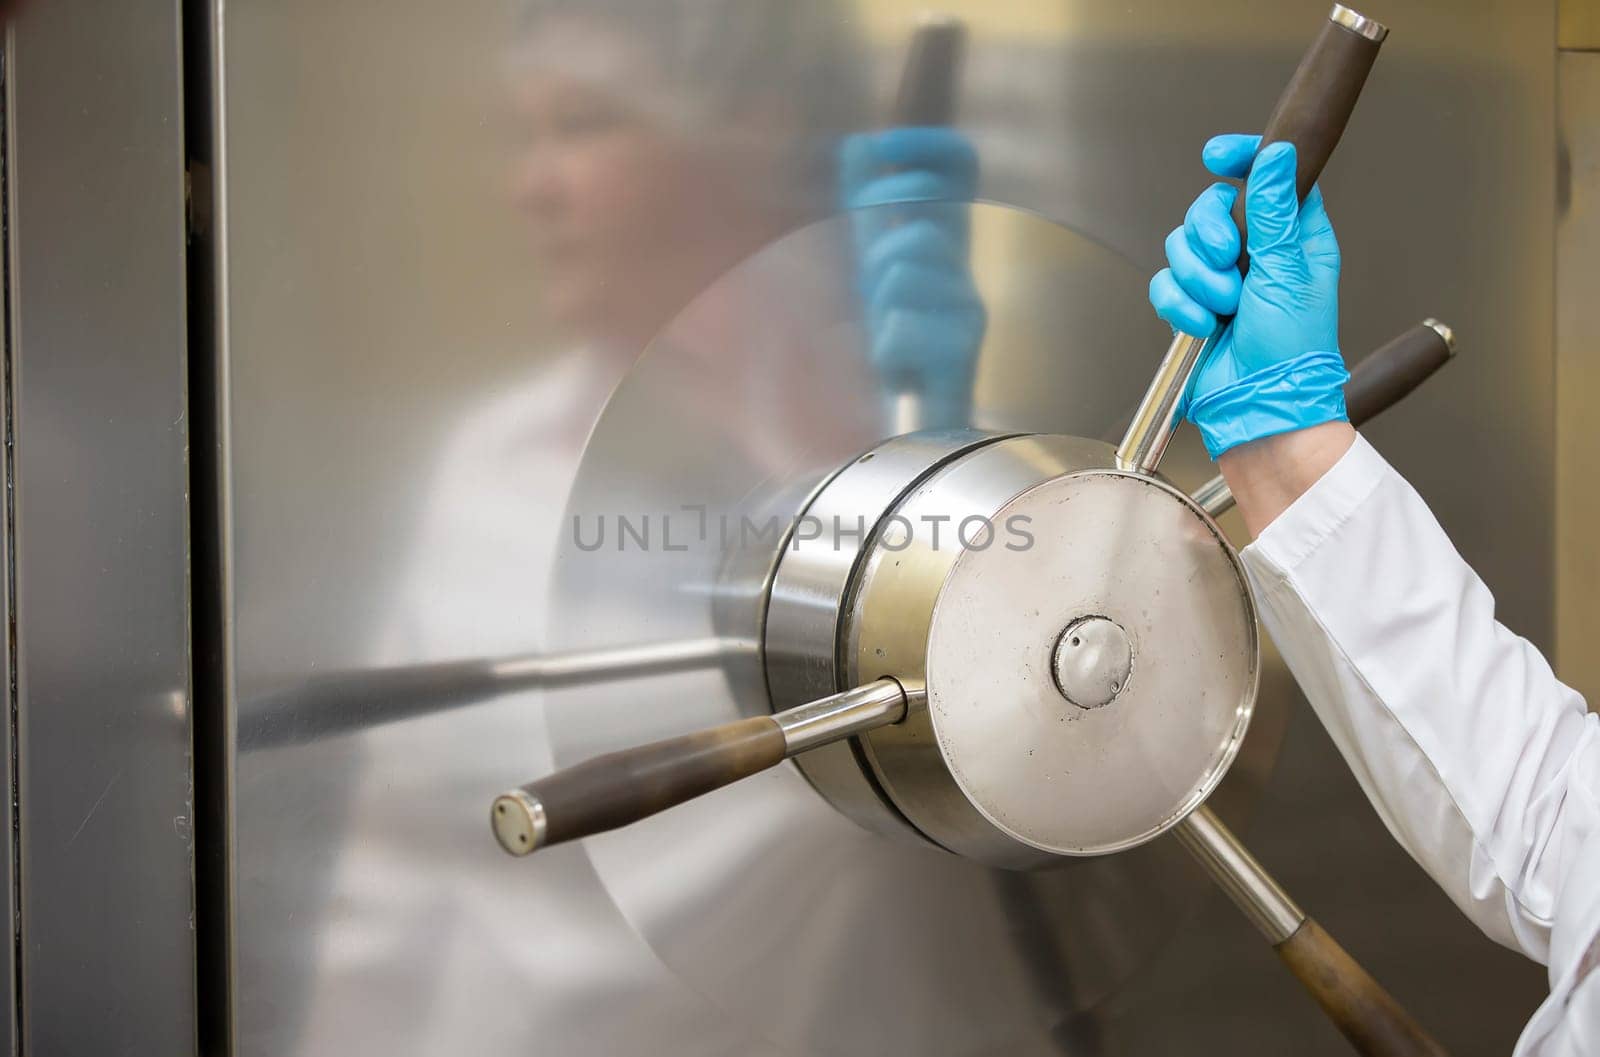 A worker's hand turns a valve in a pharmaceutical or medical device manufacturing plant.